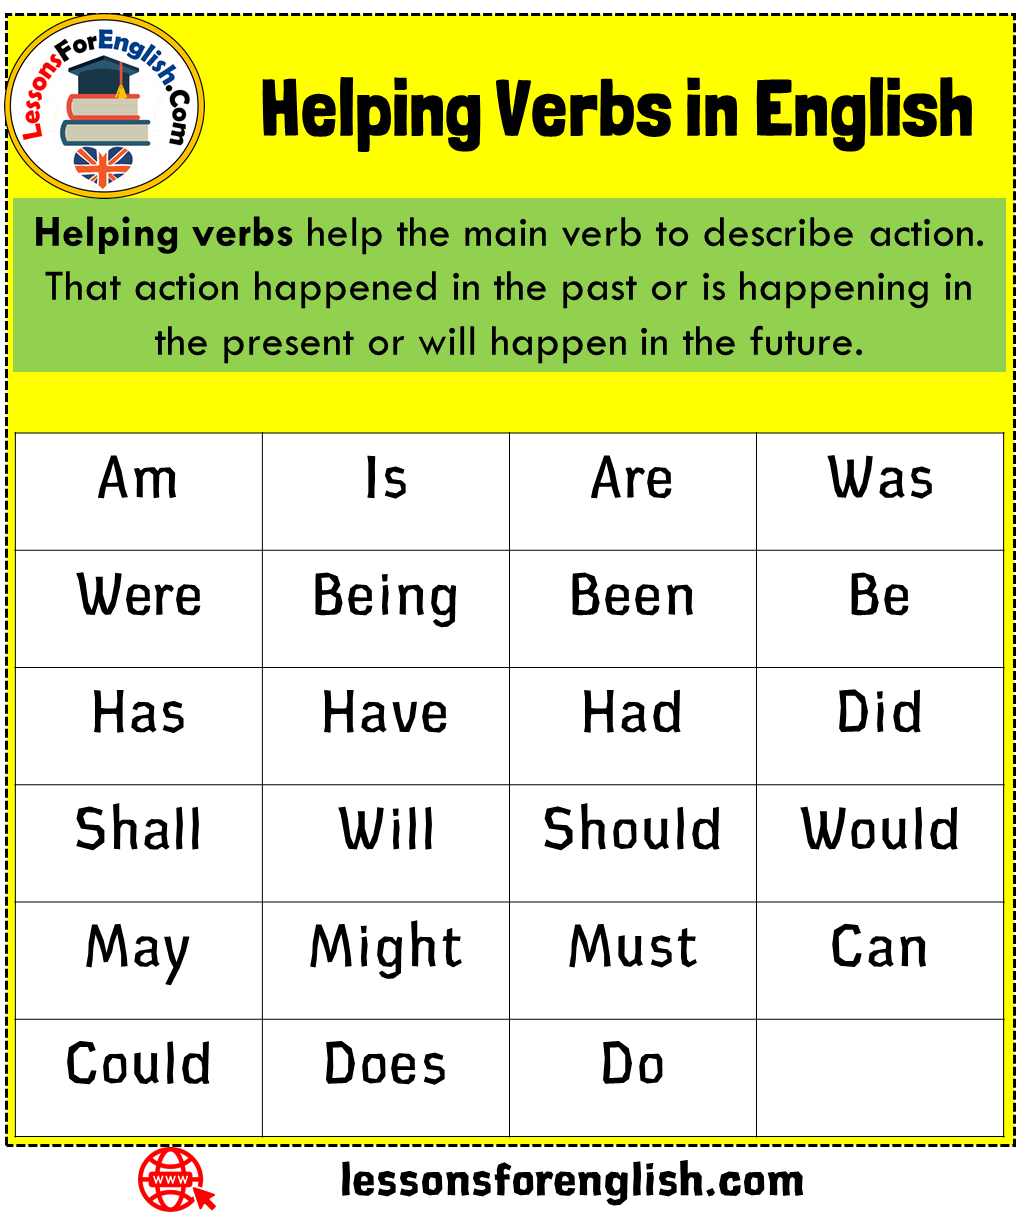 helping-verbs-in-english-lessons-for-english